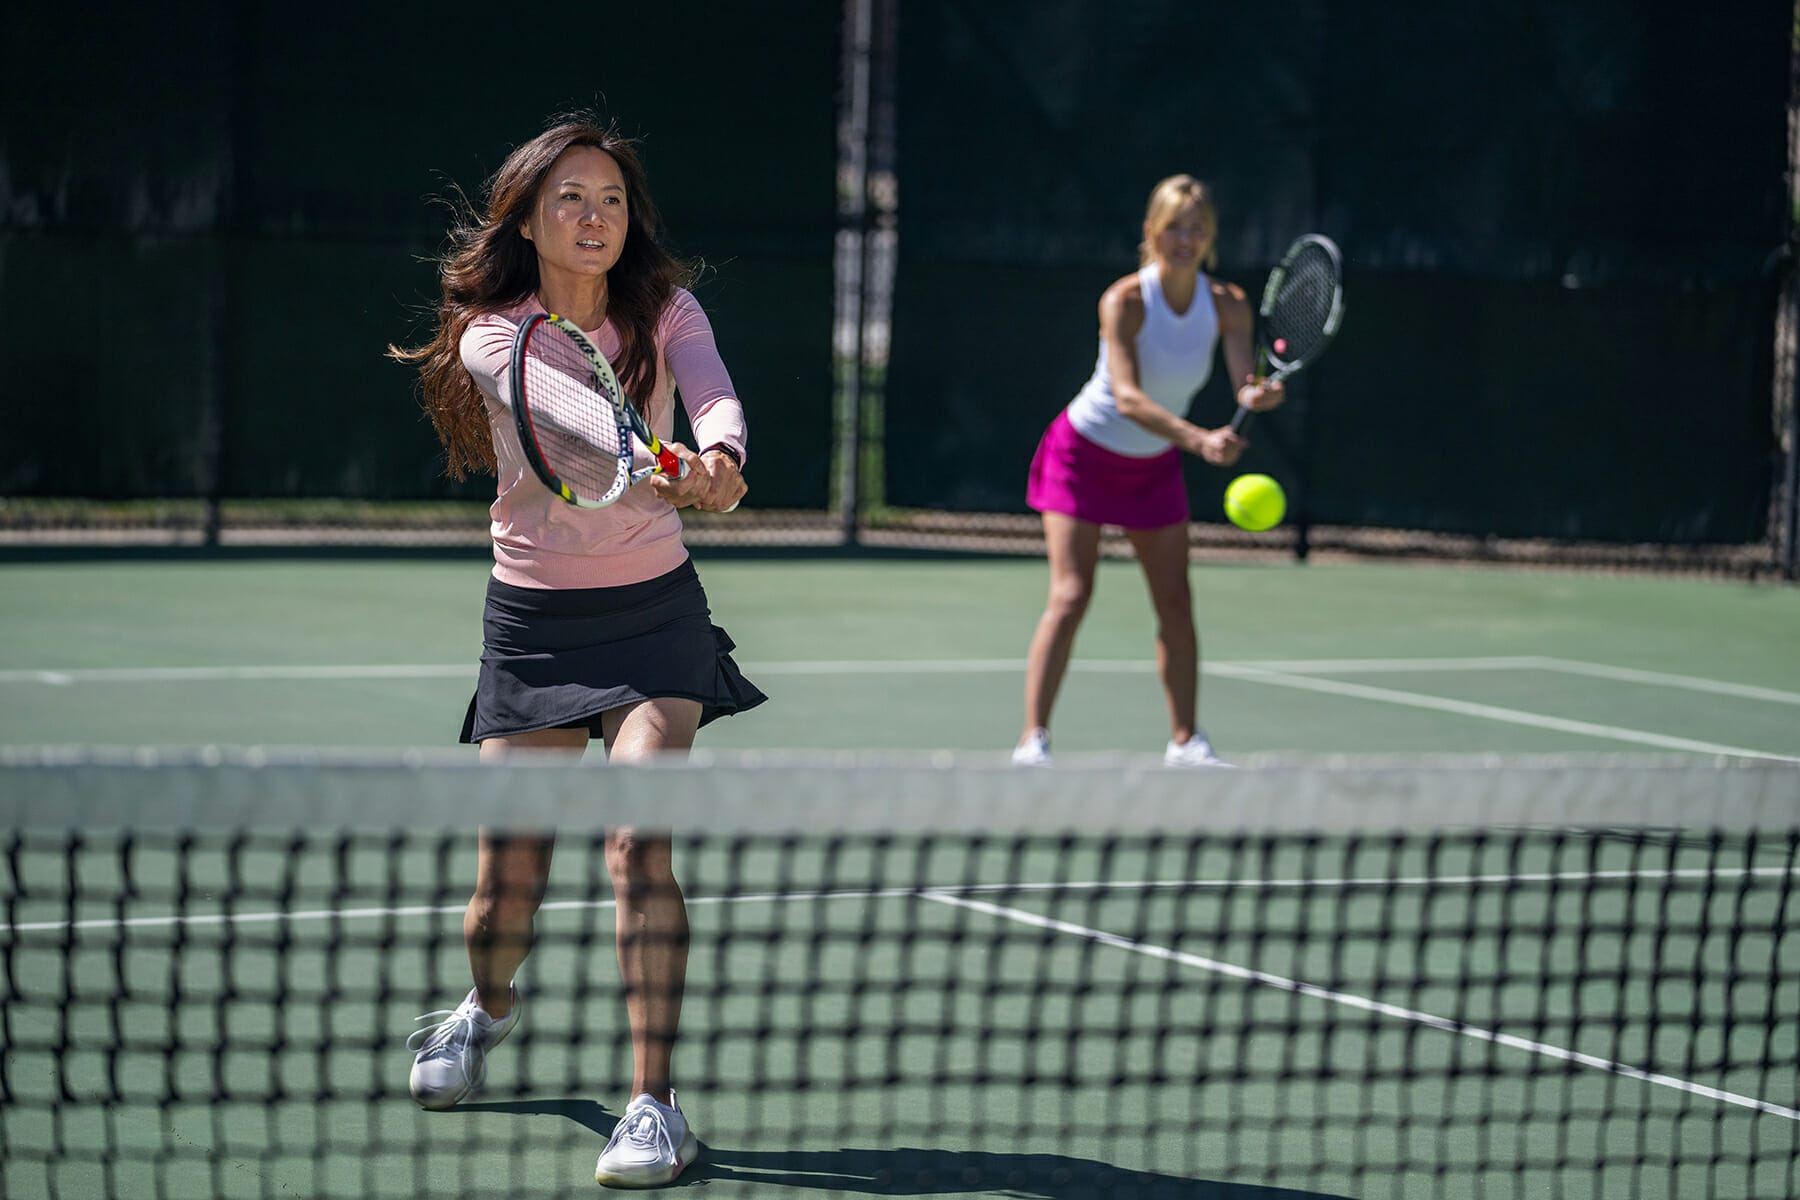 Summerlink offers Tennis Classes and courts among the many activities available to our community